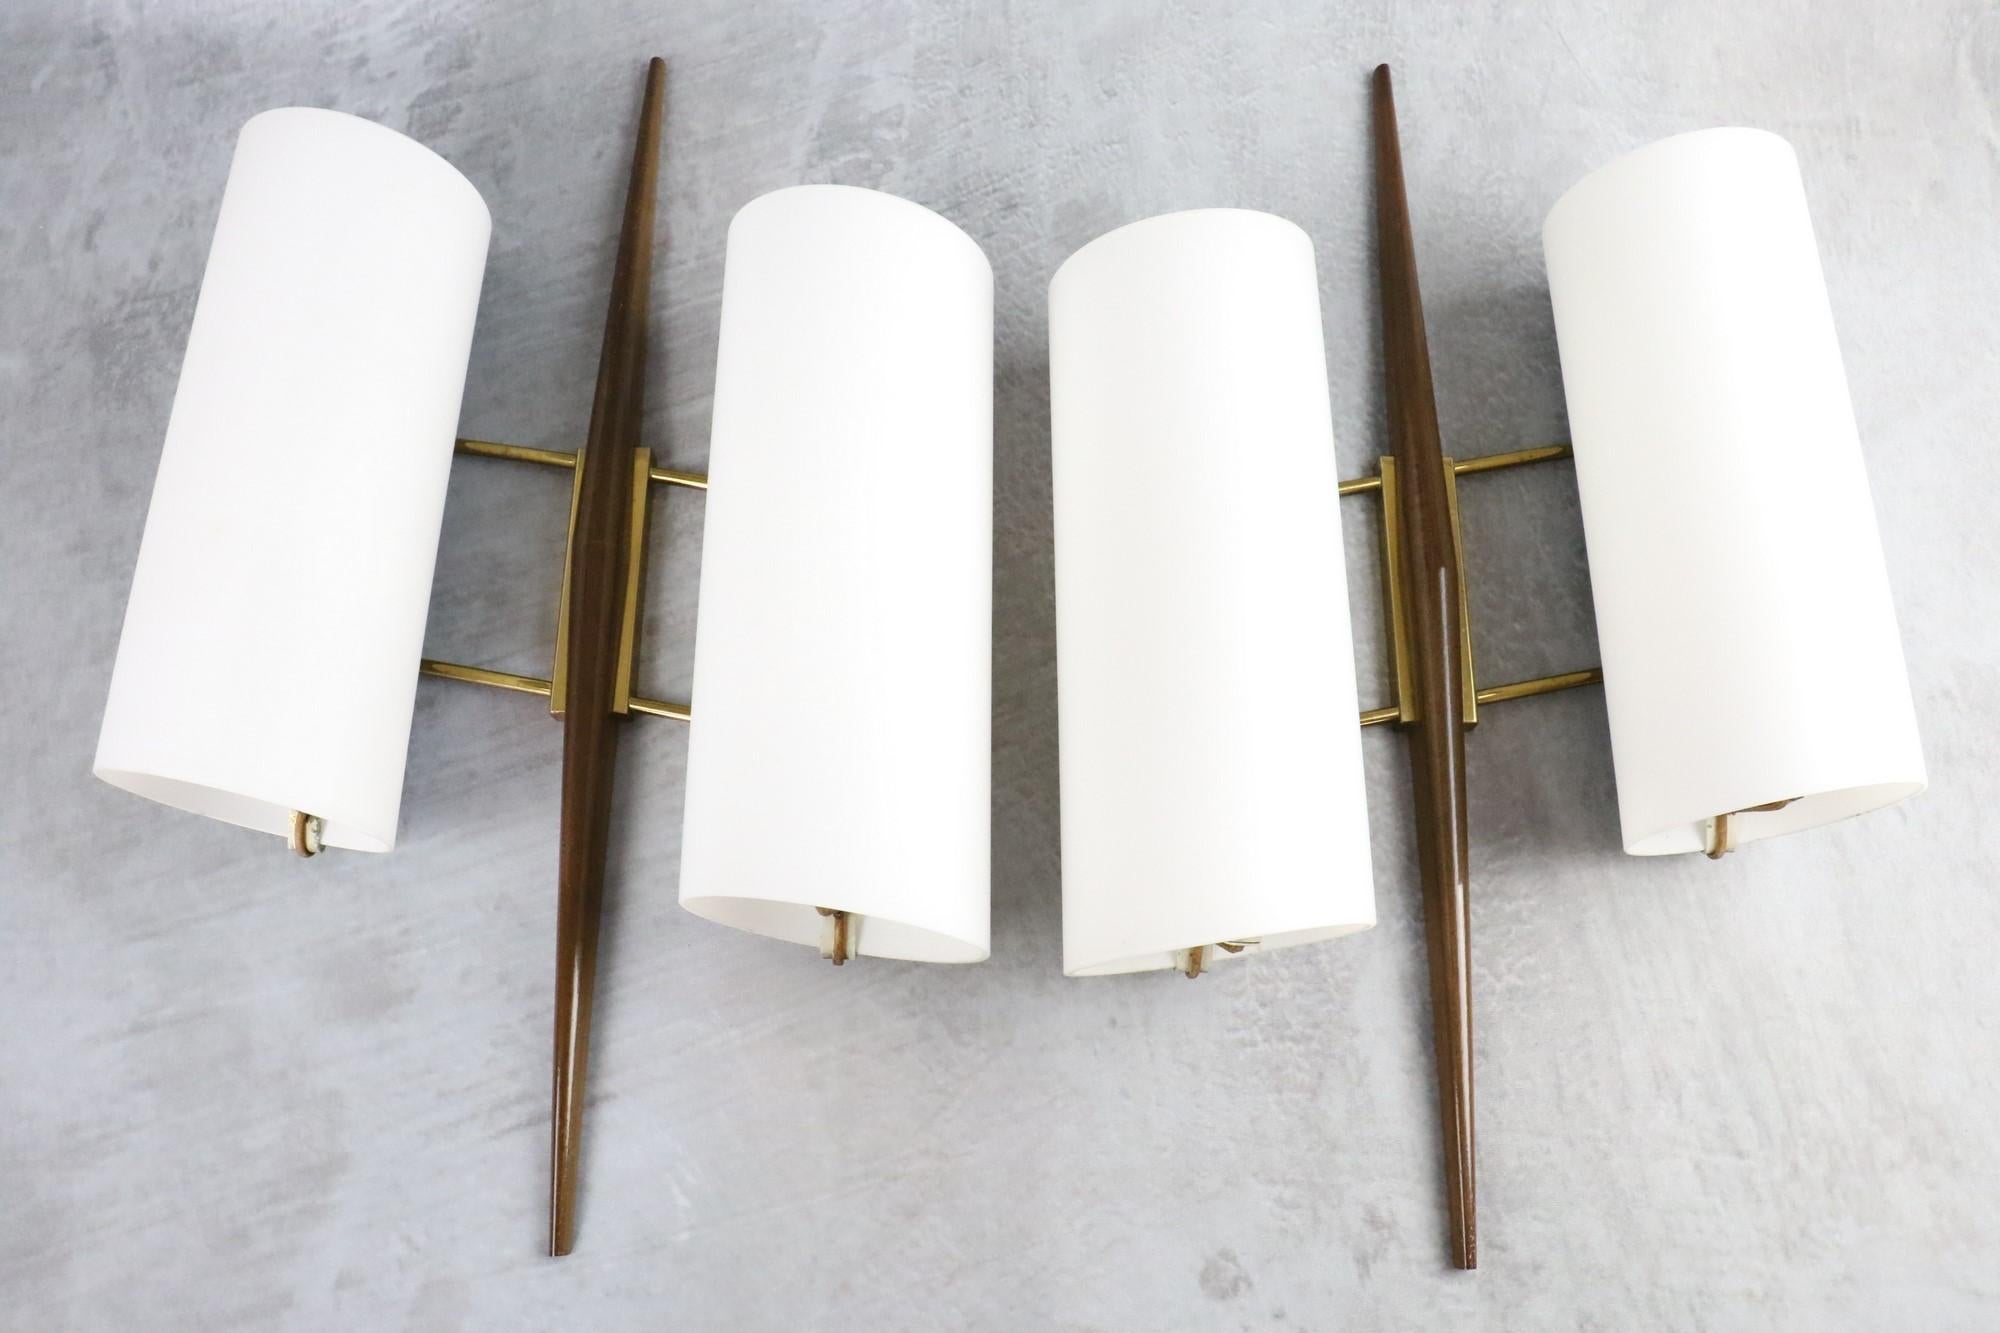 Maison Arlus, Pair of Mid-Century Modern Double Lighting Wall Lamps 1950s France 1